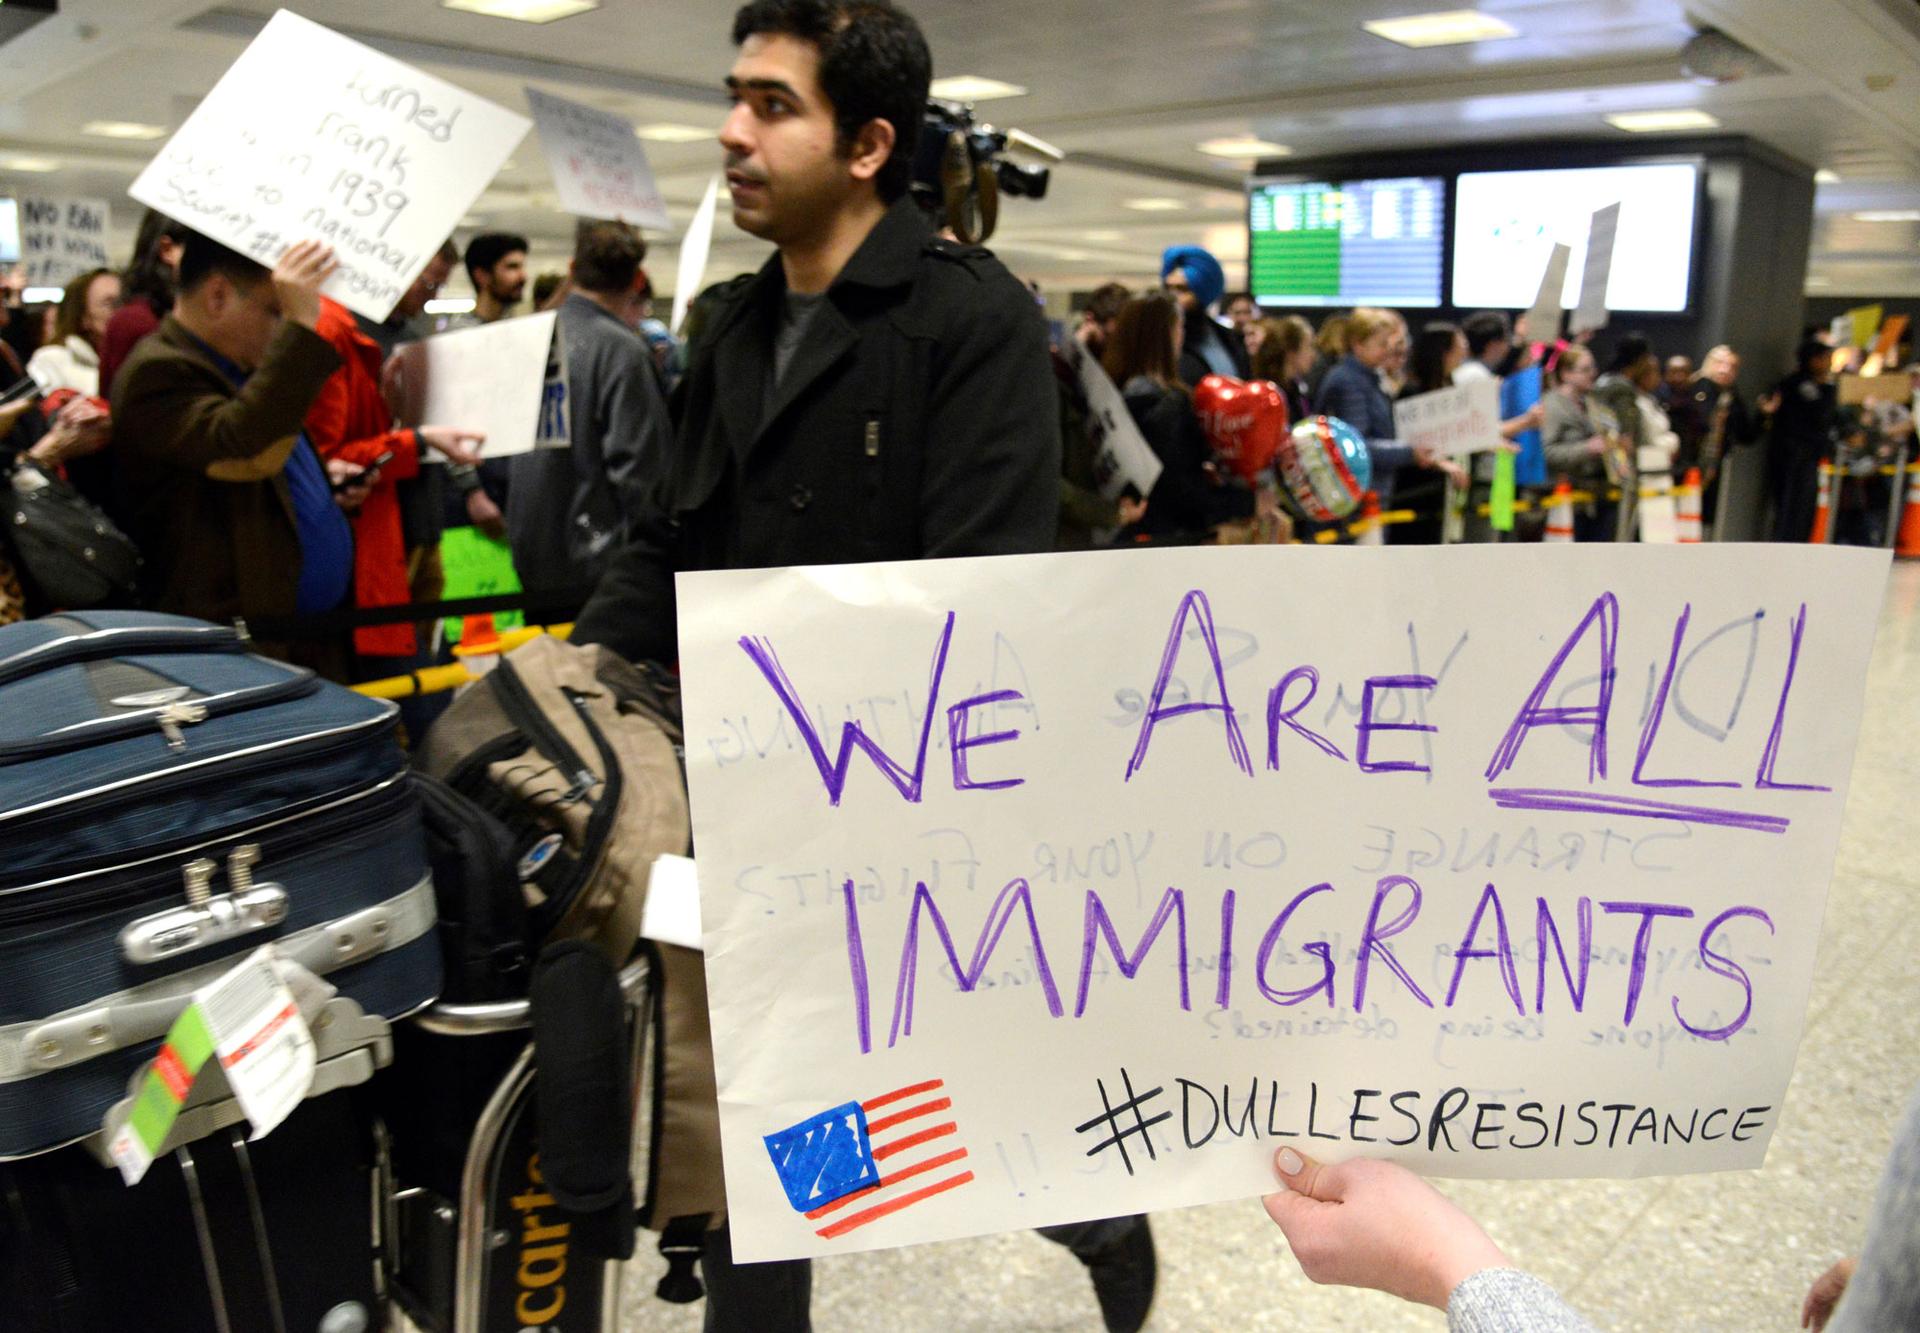 Dozens of pro-immigration demonstrators cheer and hold signs as international passengers arrive at Dulles International Airport.